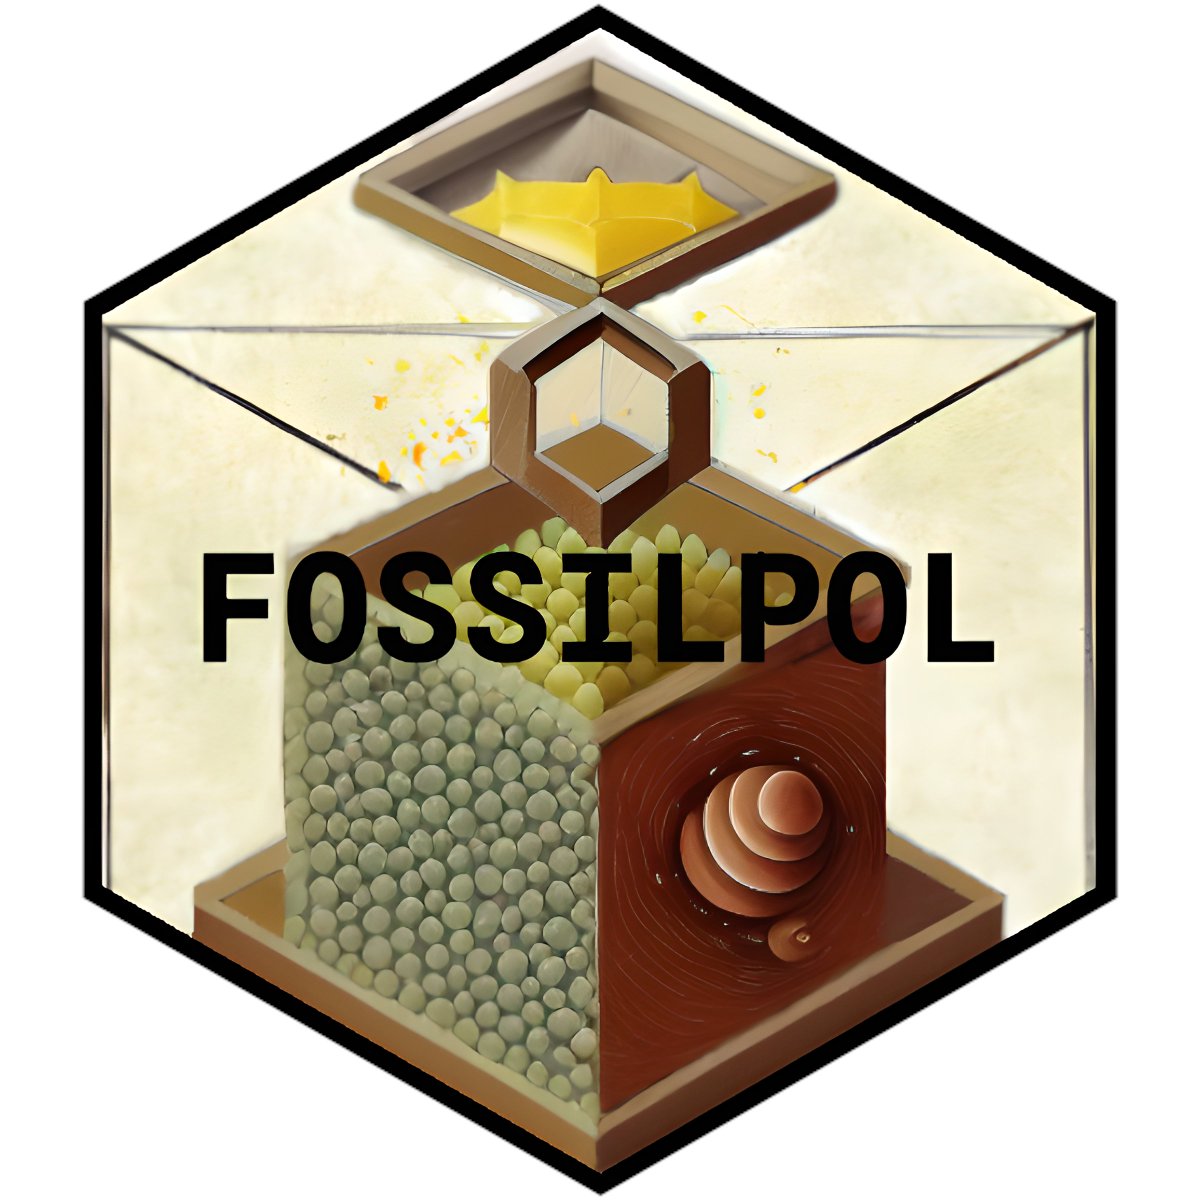 Looking for a discipline-friendly guideline to process and standardize #fossilpollen data? Look no further than the #FOSSILPOL #workflow and #Rpackage! Check out how to benefit your research – thread ⬇️. @GEB_macro onlinelibrary.wiley.com/doi/full/10.11… @BioUiB @BjerknesBCCR @mohnfoundation